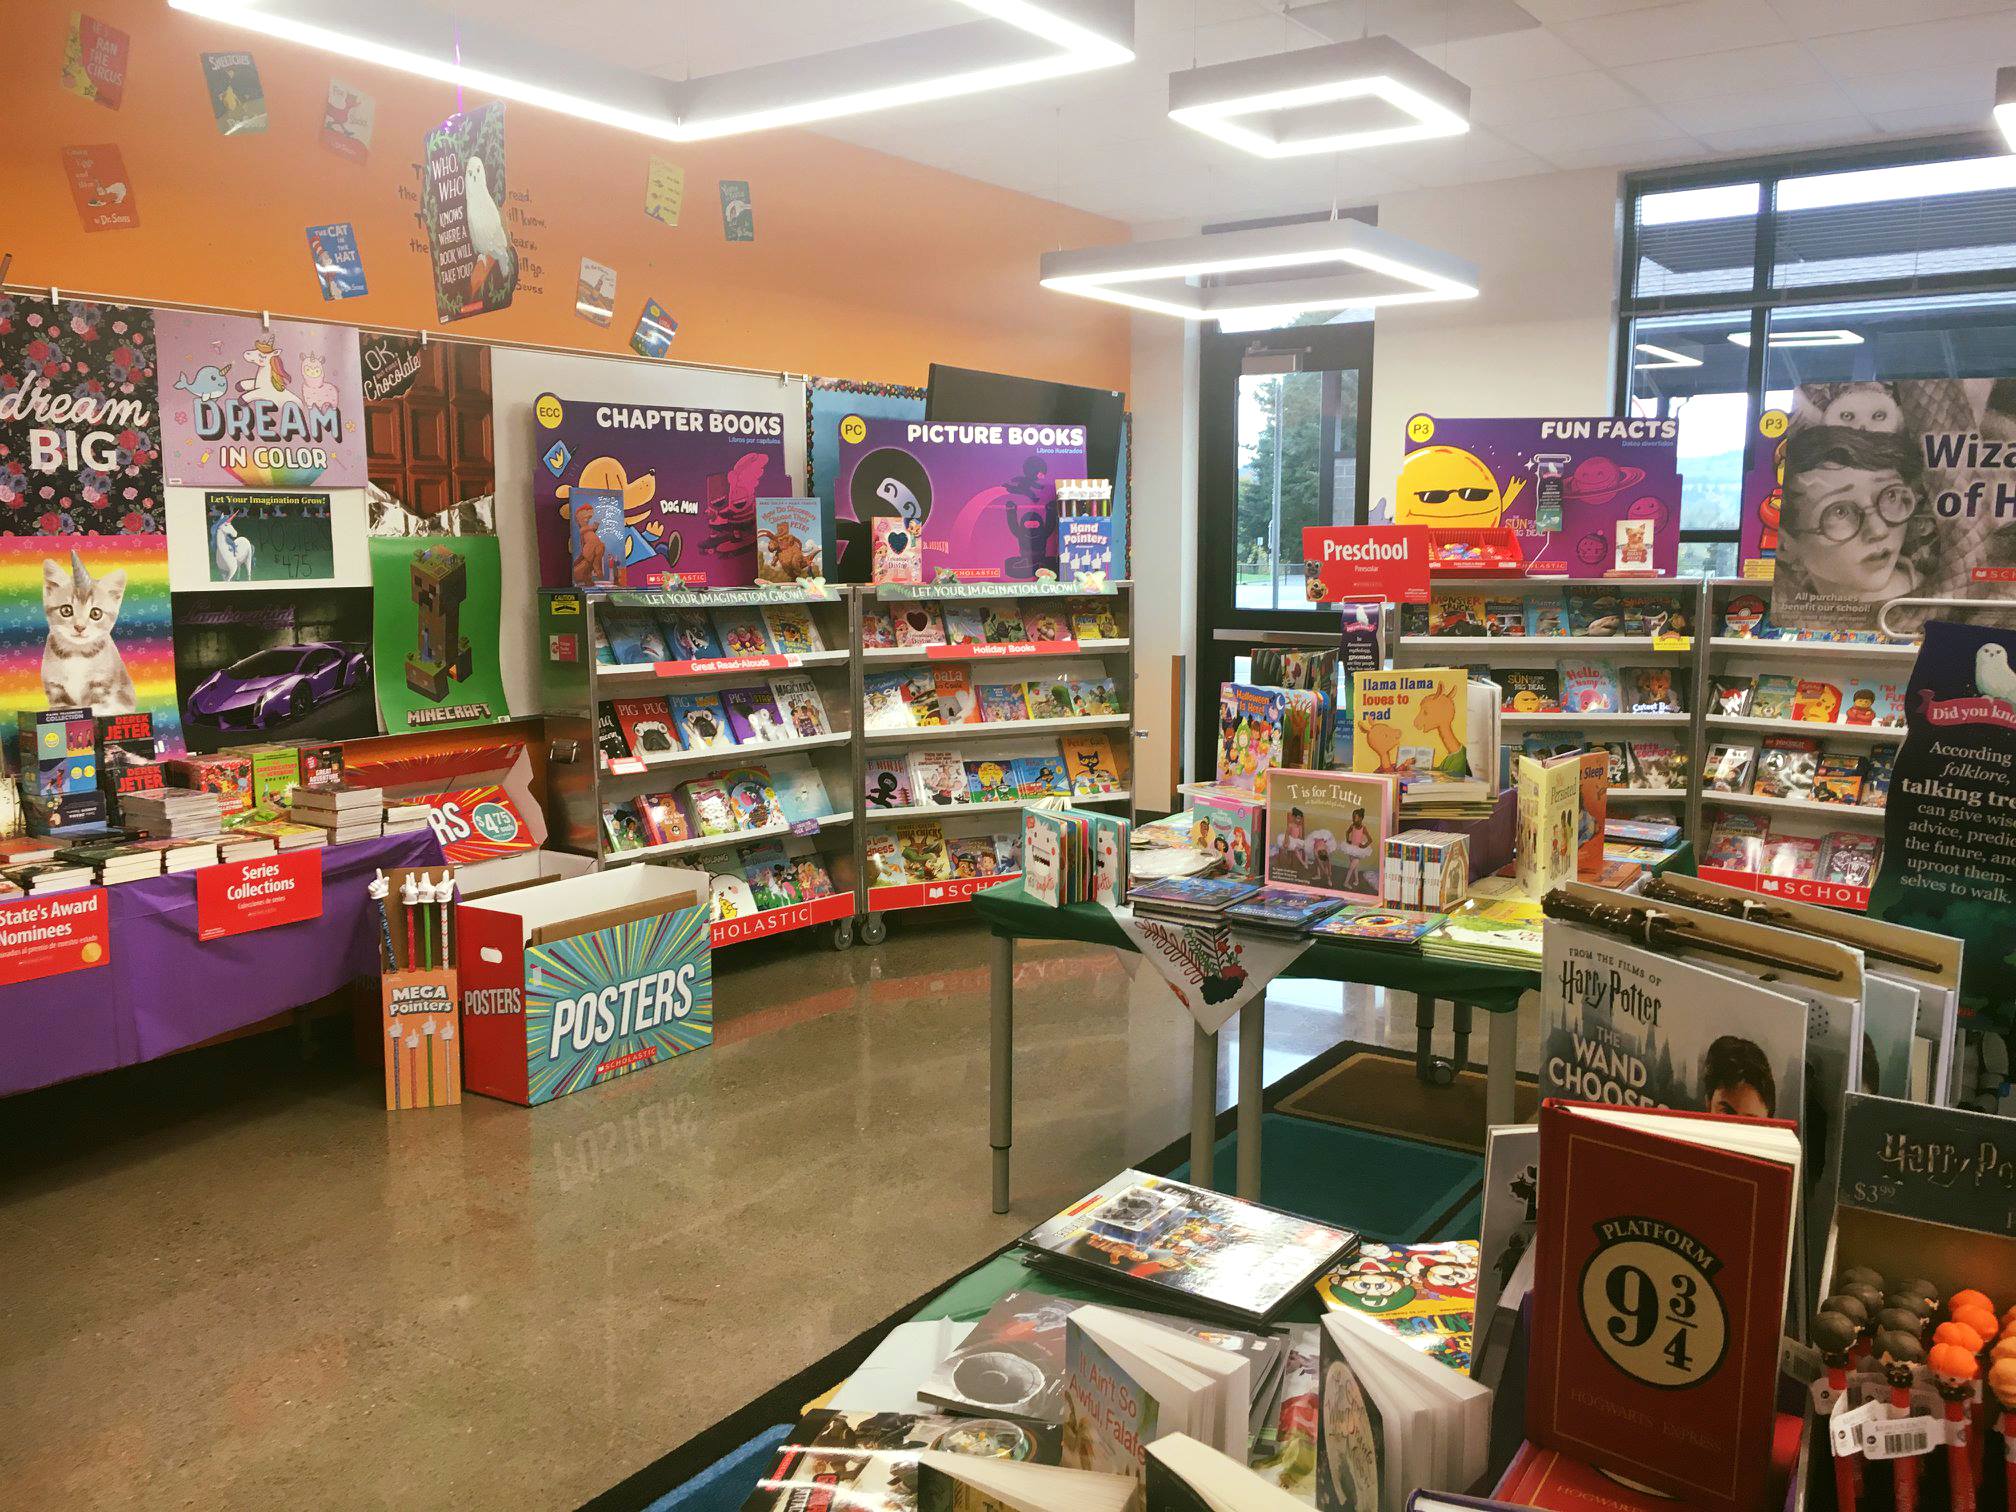 Display tables and books for the book fair